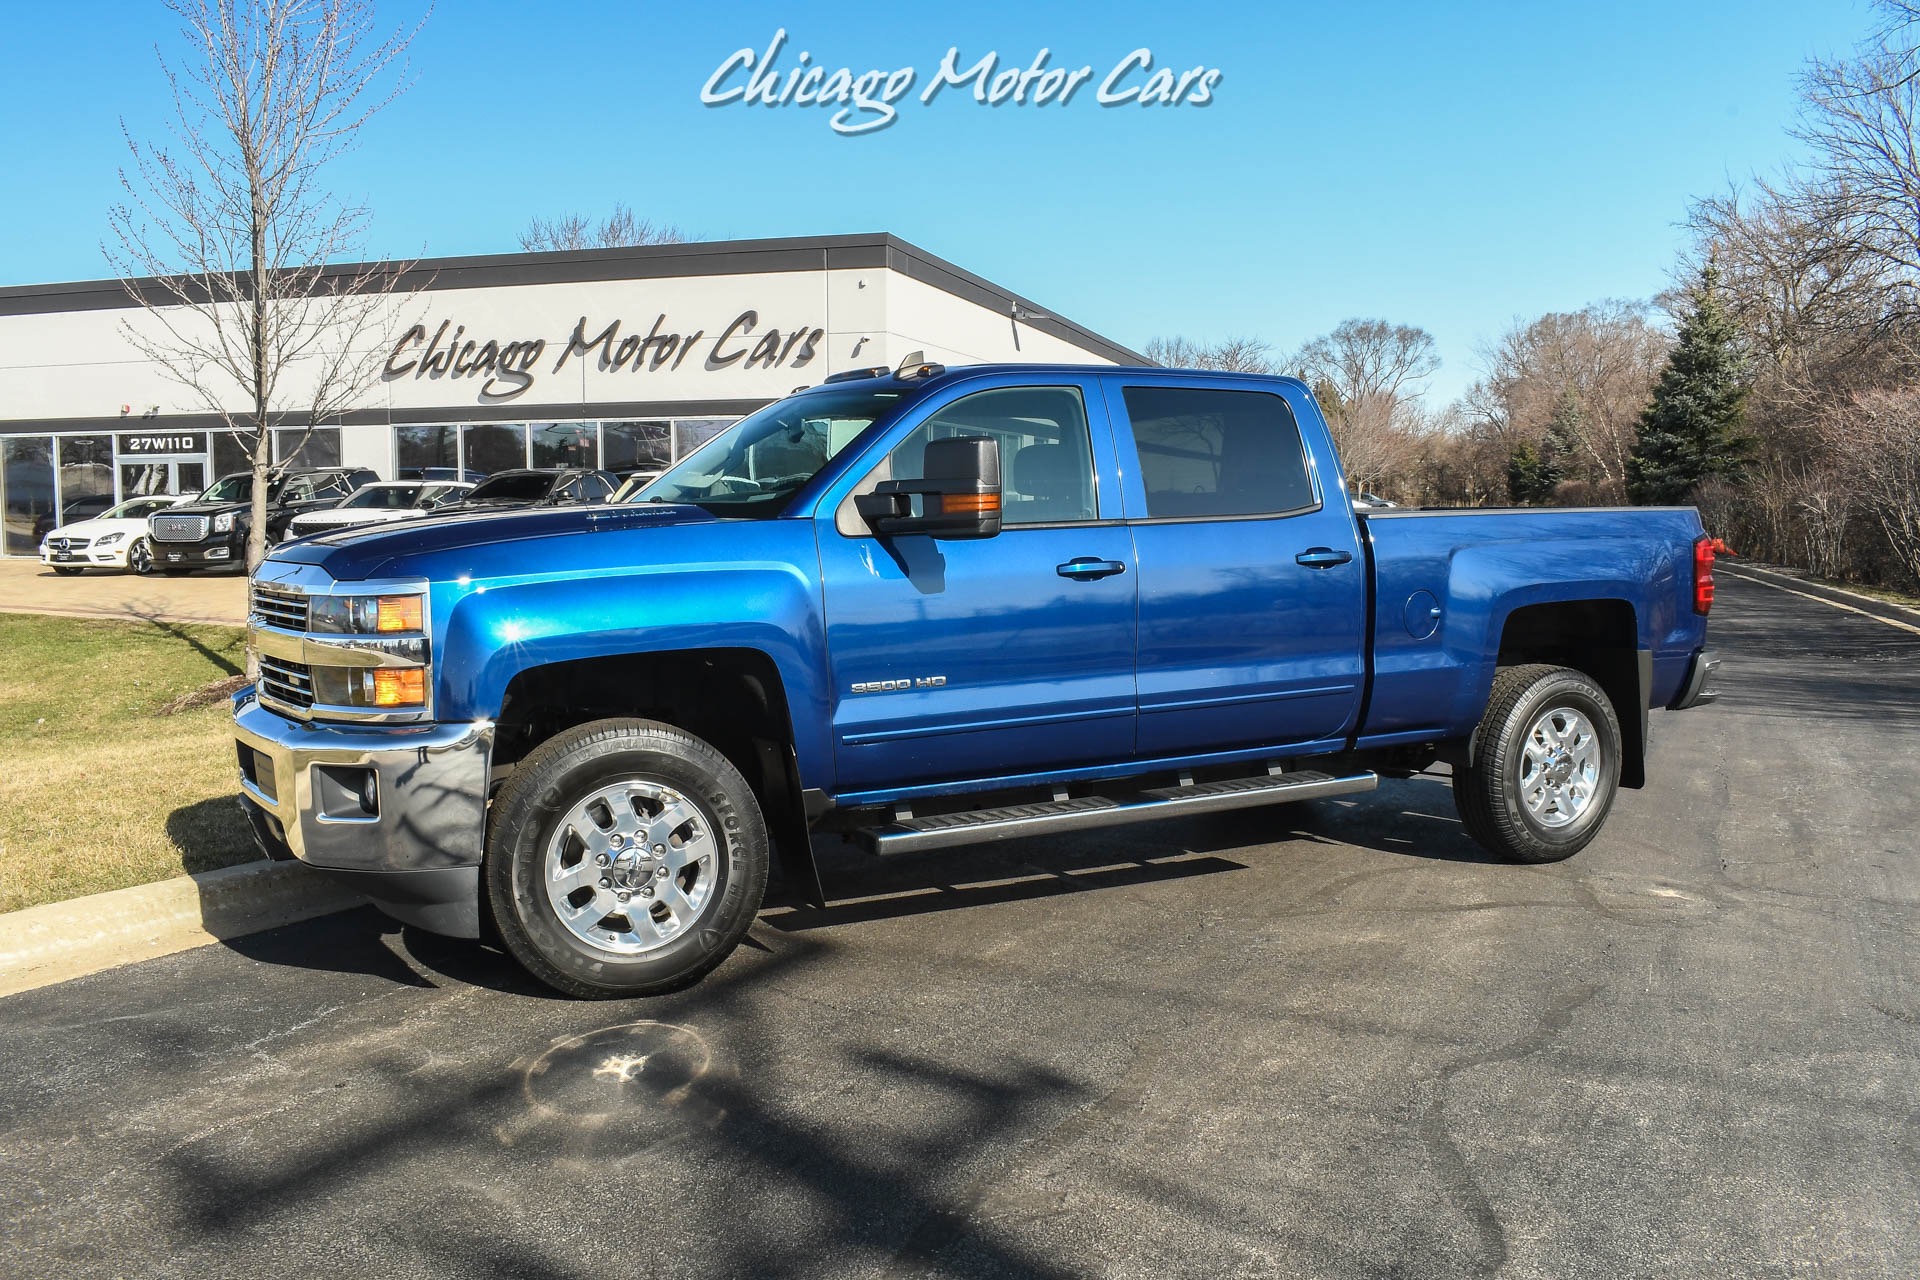 Used 2015 Chevrolet Silverado 3500HD LT SRW 2WD Crew Cab Duramax 6.6L  Diesel Turbo V8! LT CONVENIENCE PACKAGE! For Sale (Special Pricing) |  Chicago Motor Cars Stock #18103